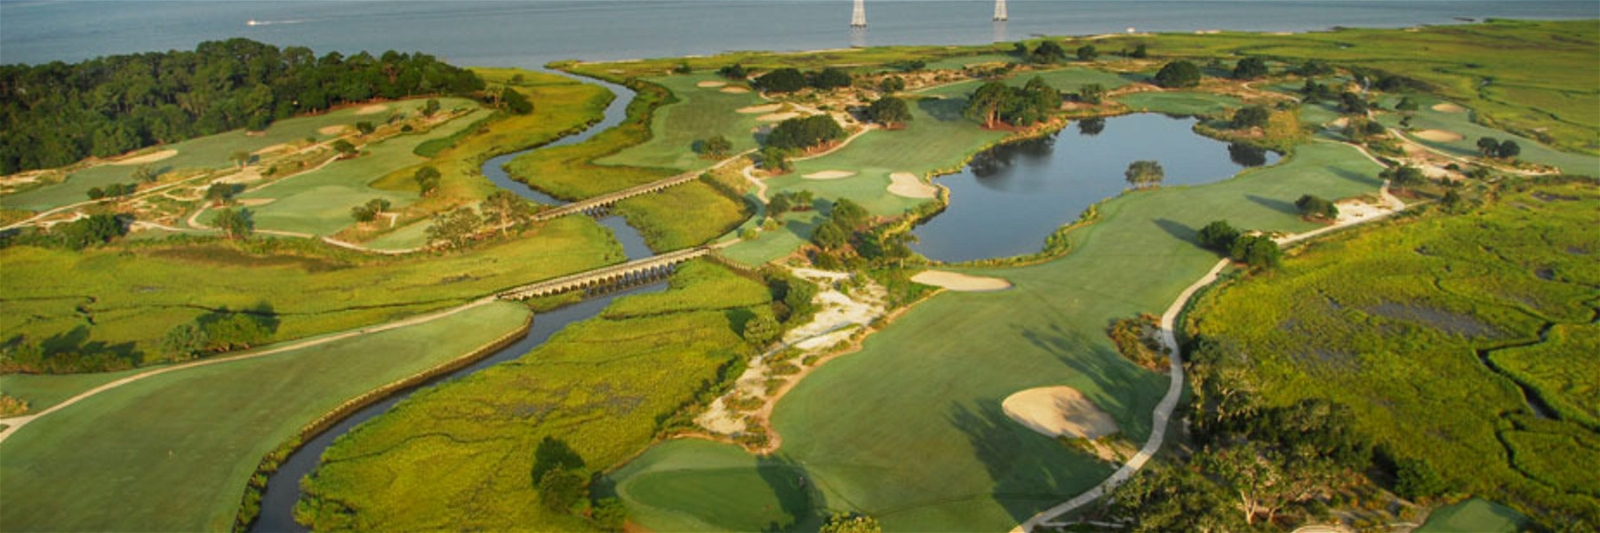 Golf Vacation Package - Sea Island: Stay and Play with 3 Nights & 3 Rounds PLUS $100 Callaway Gift Card!!